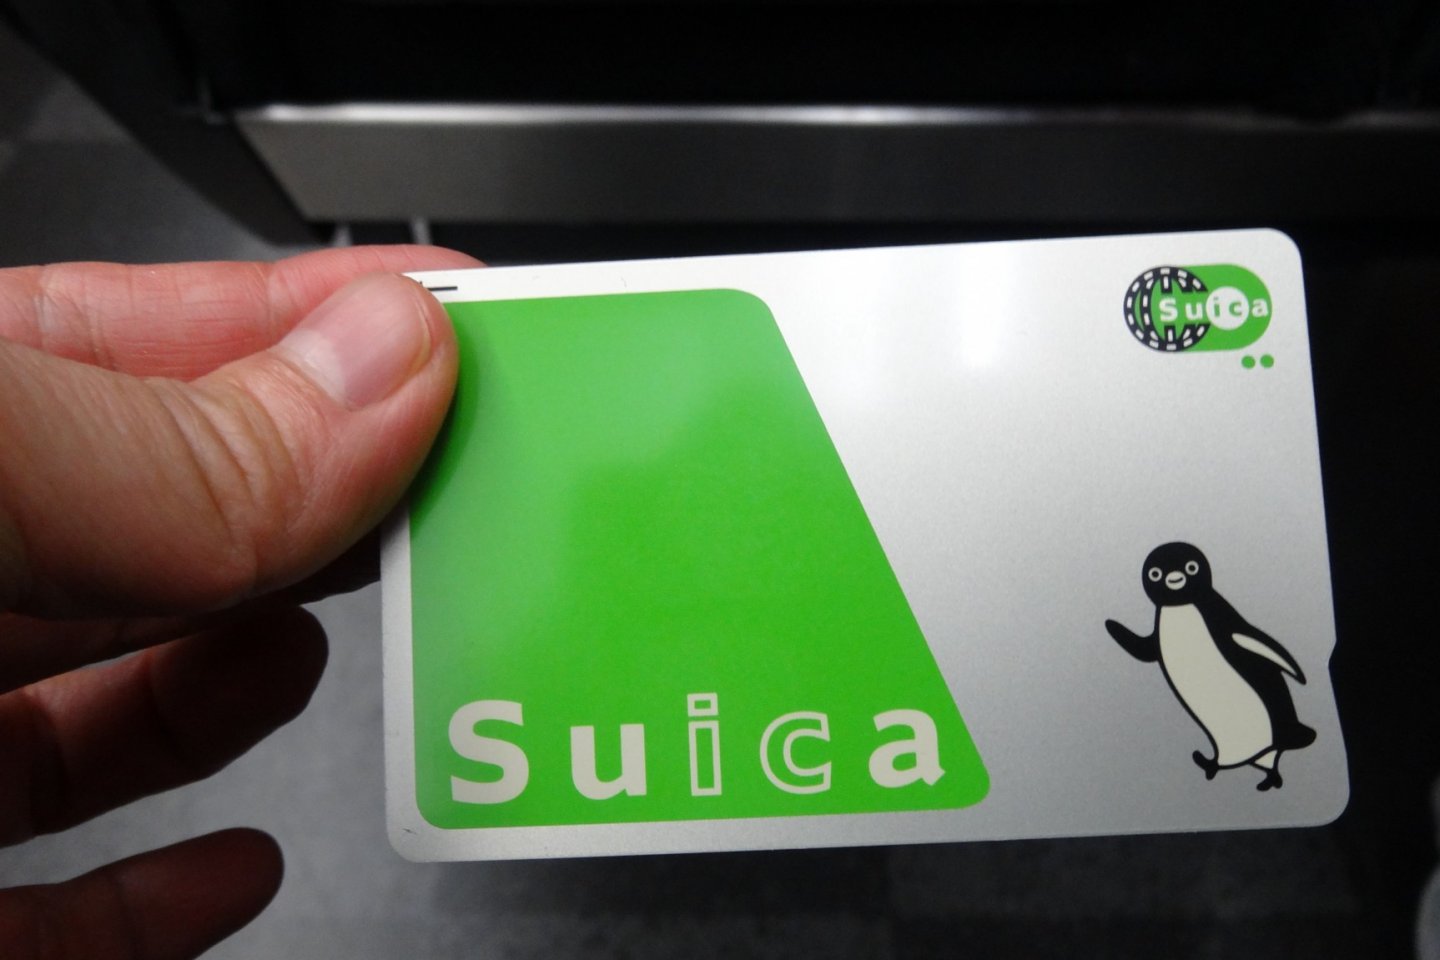 The Suica card